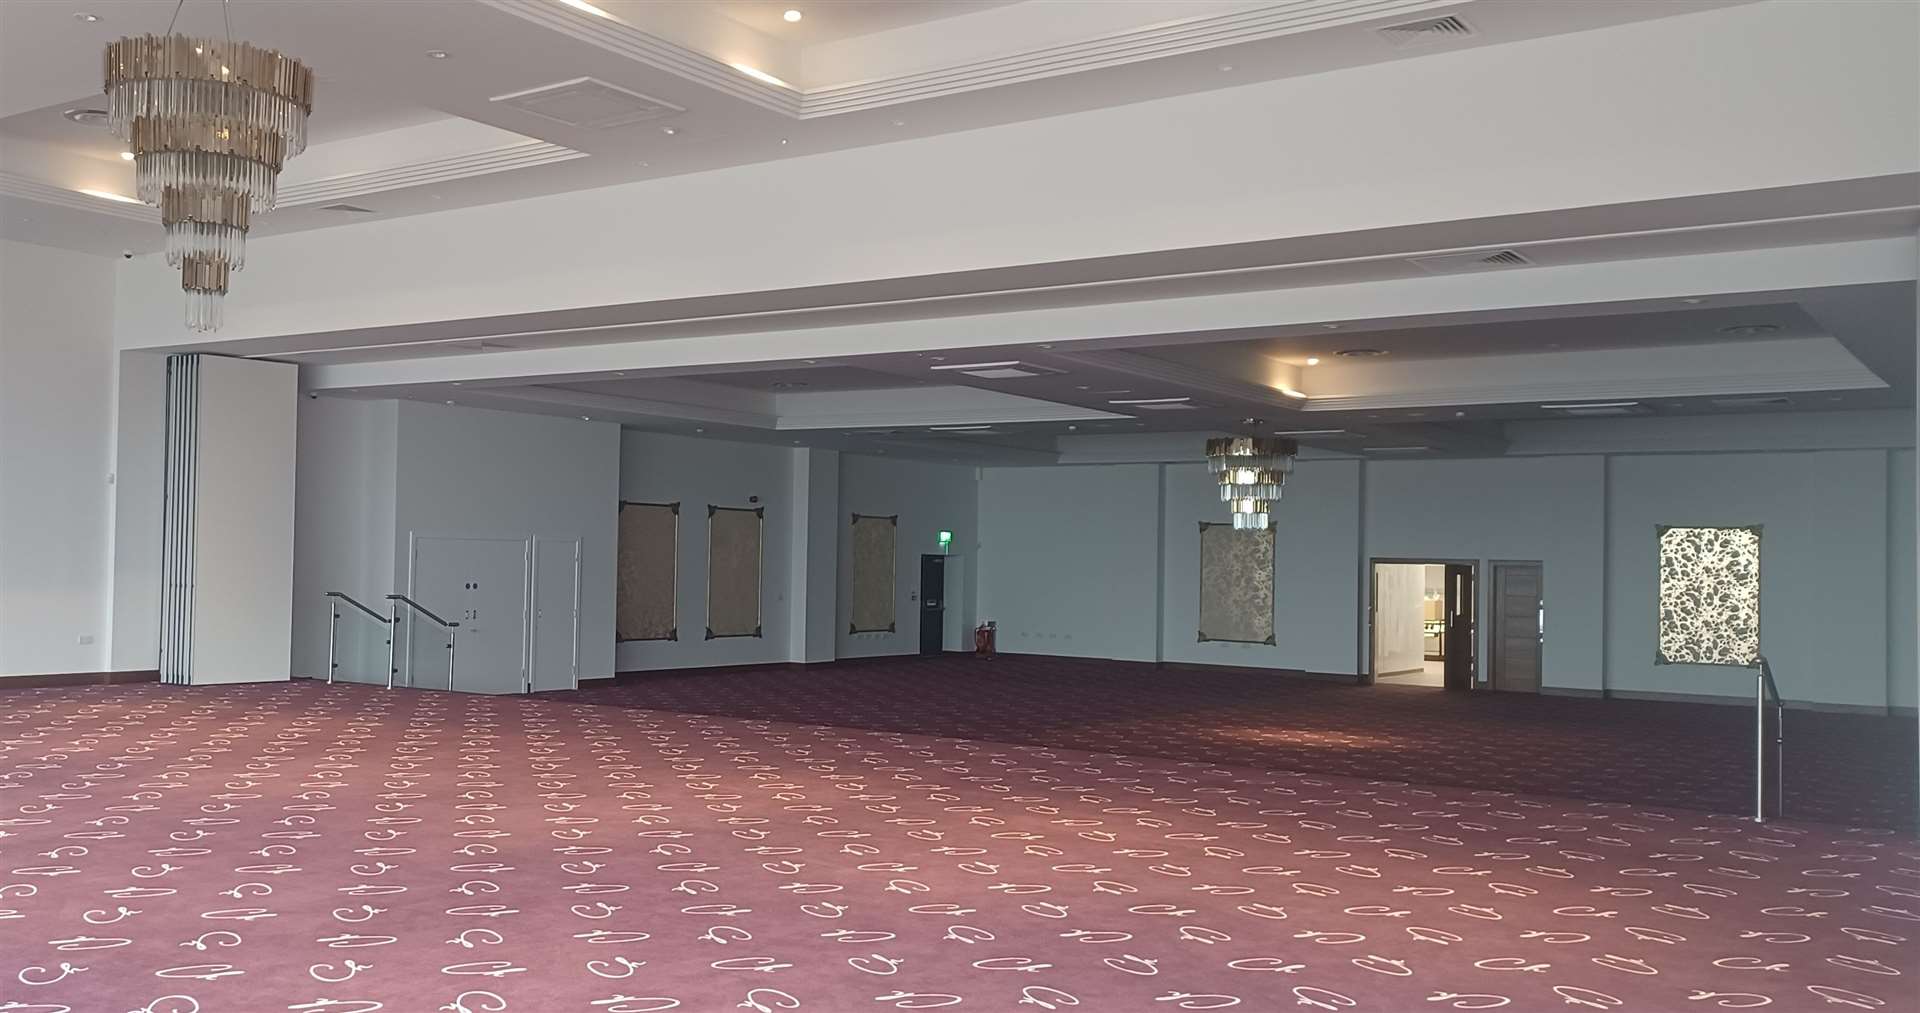 The main hall can seat up to 450 guests